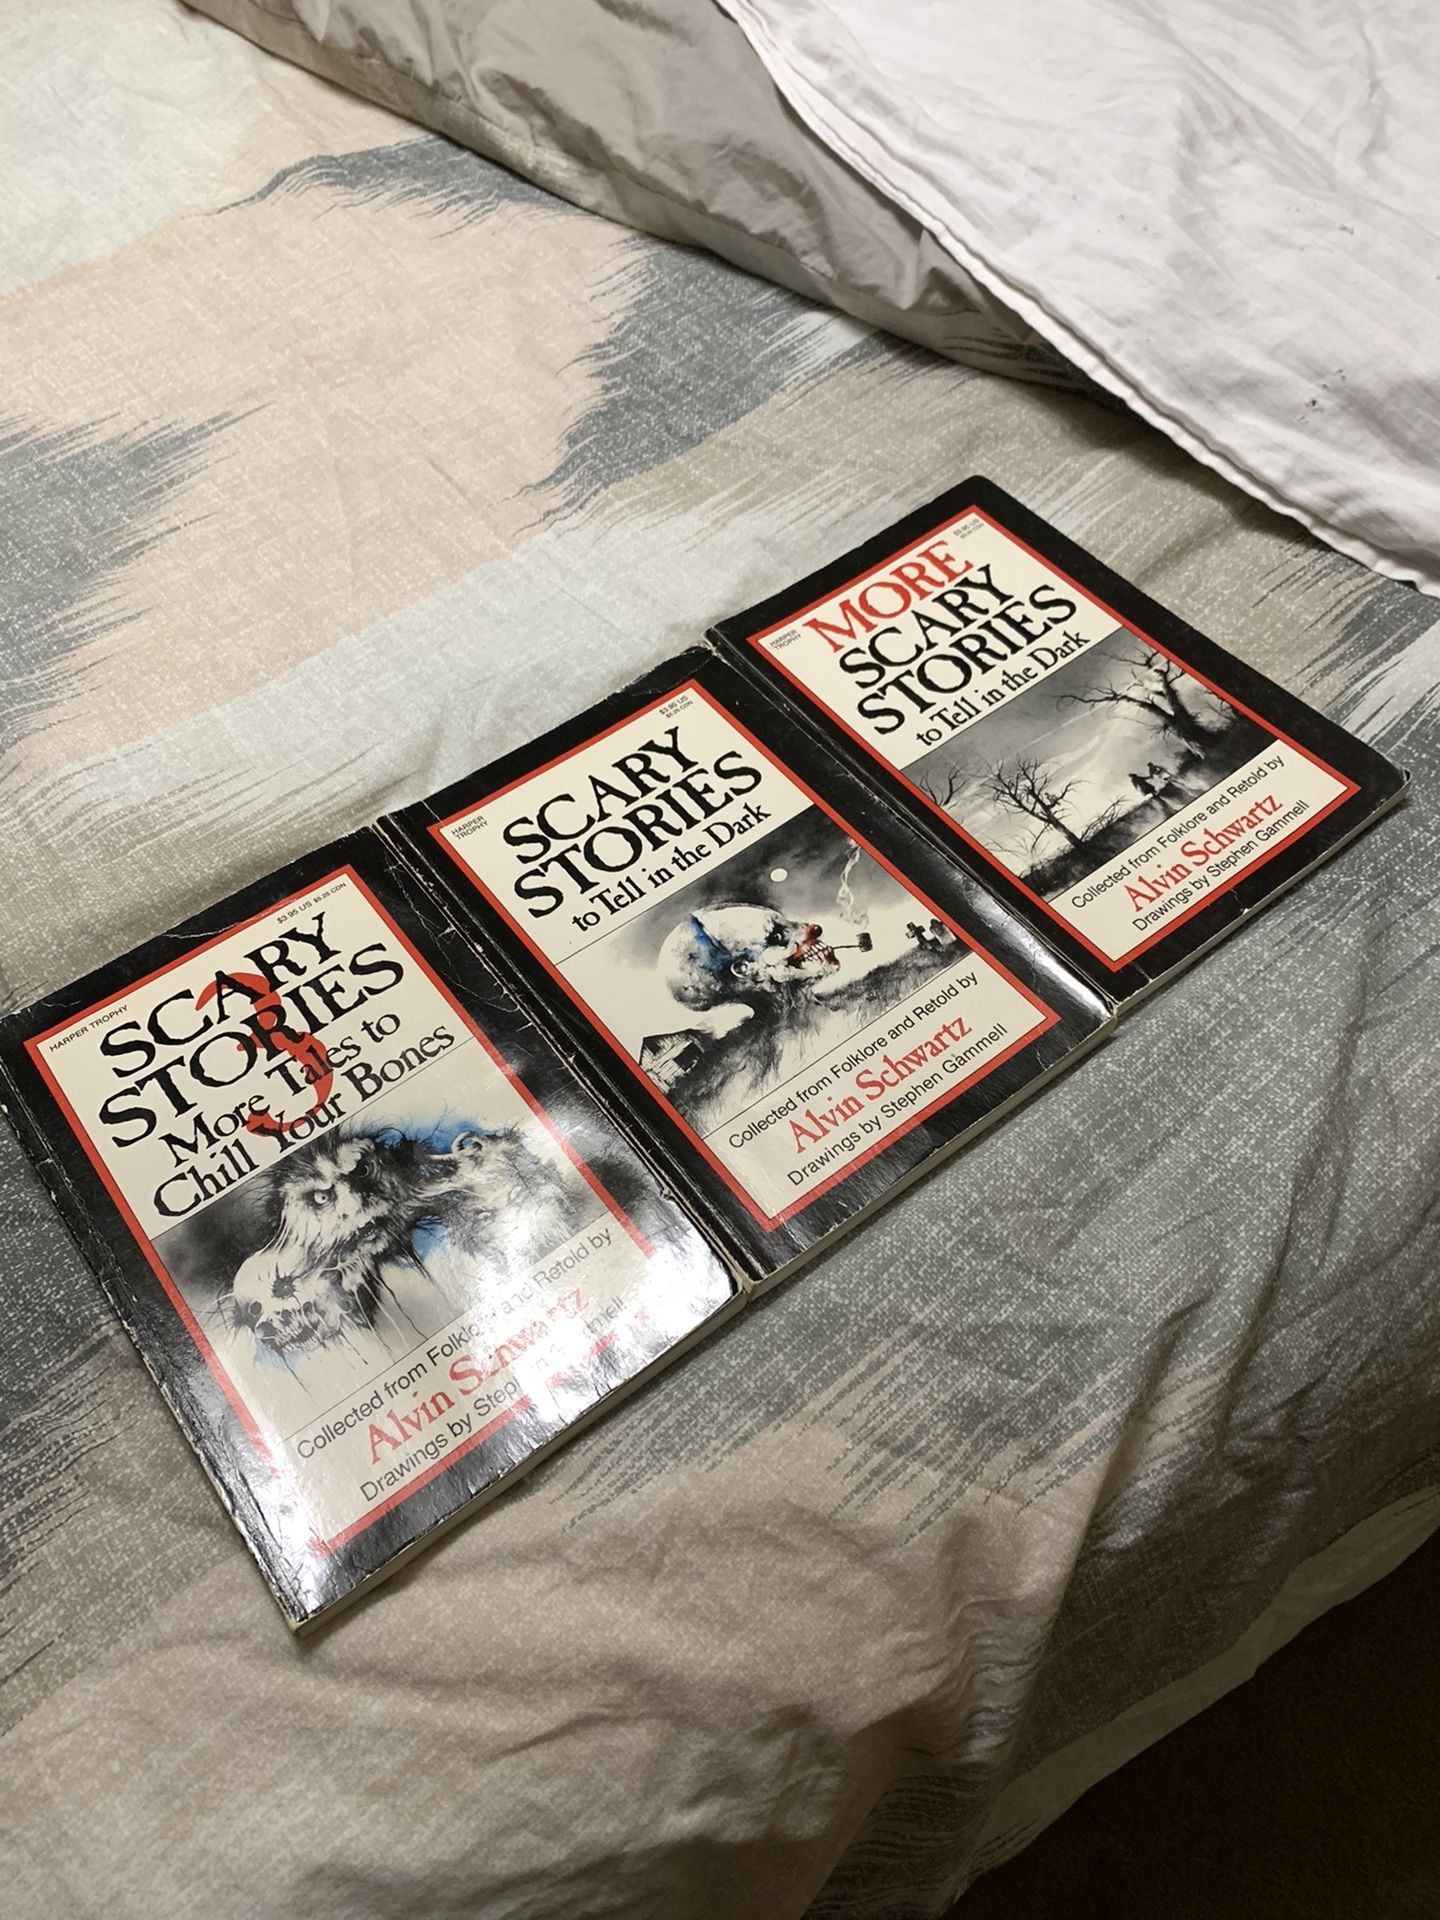 Scary Stories 1, 2, and 3 Series